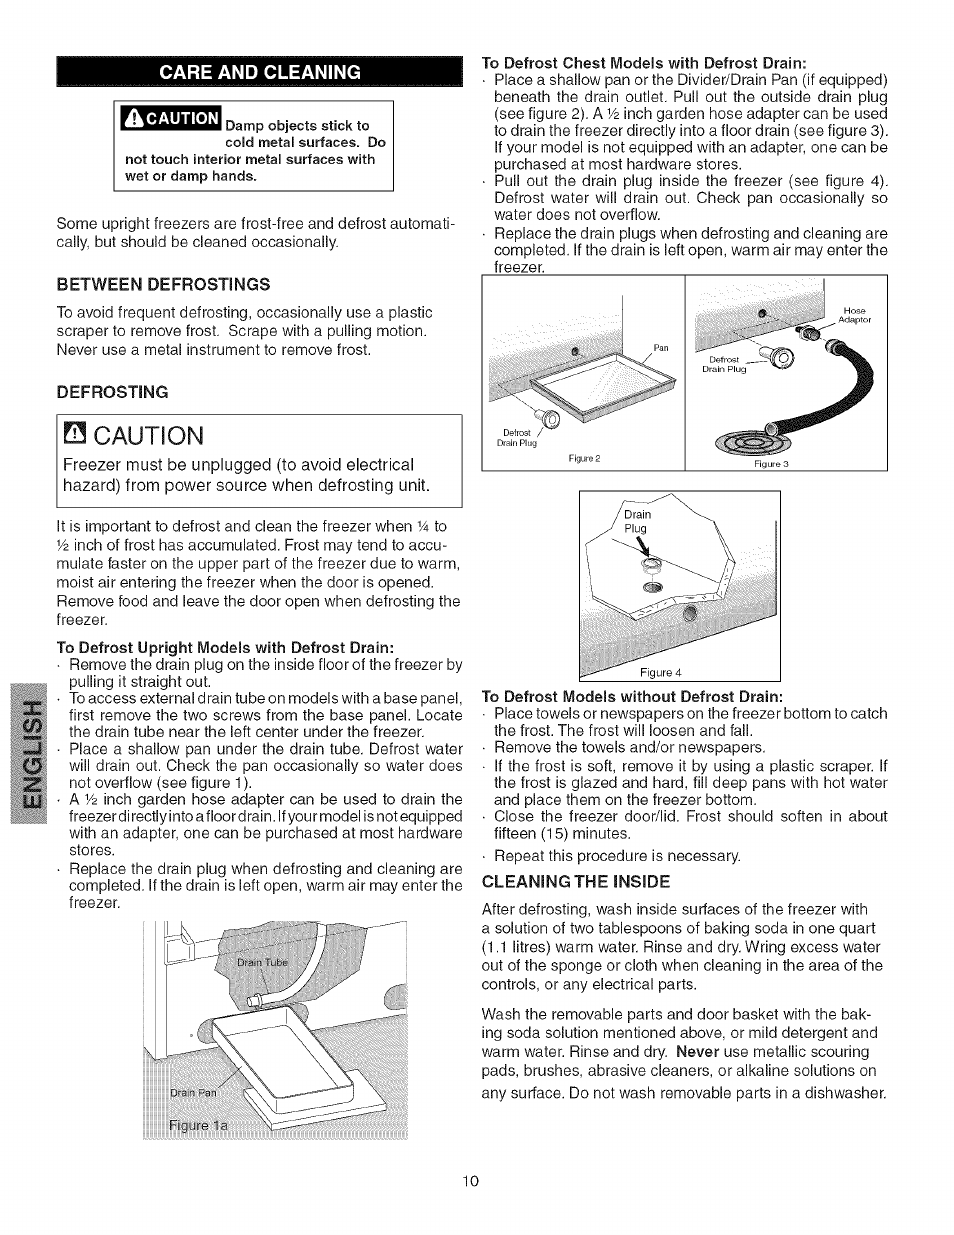 Care and cleaning, To defrost chest models with defrost drain, To defrost models without defrost drain | Care and cleaning -11, 0 caution, Care and cleaning x | Kenmore 25328452805 User Manual | Page 10 / 13